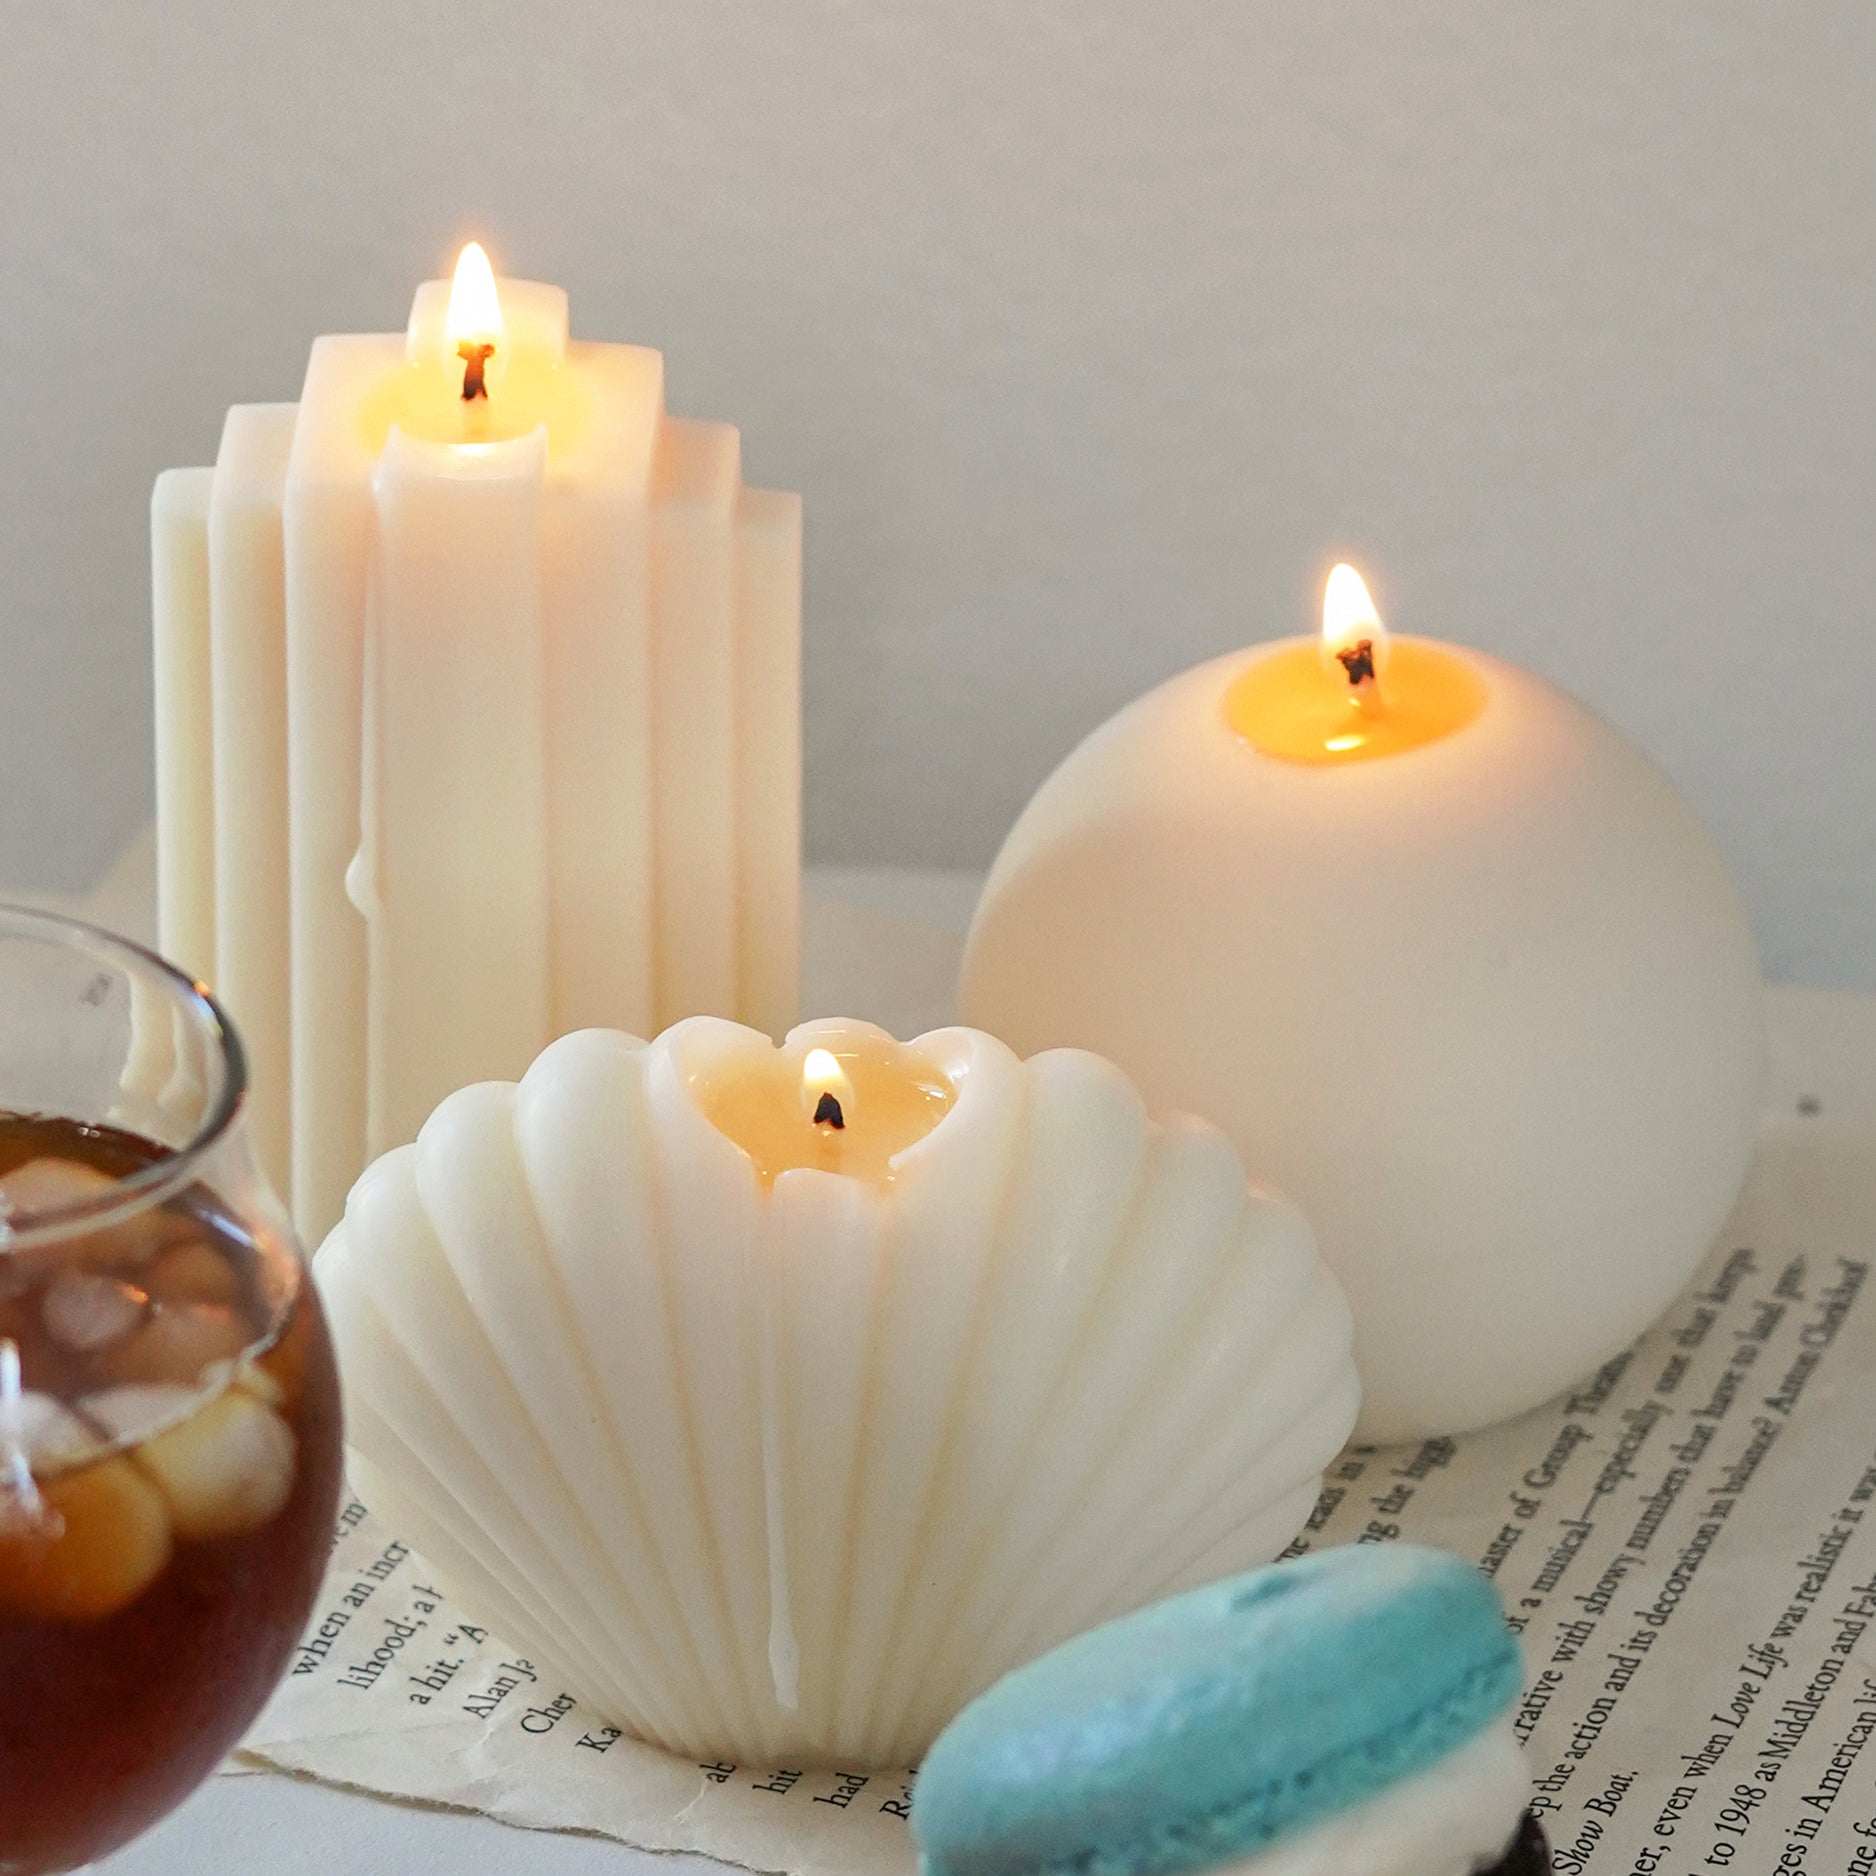 lit ribbed stair soy pillar candle, round sphere candle, and seashell shape candle on book pages